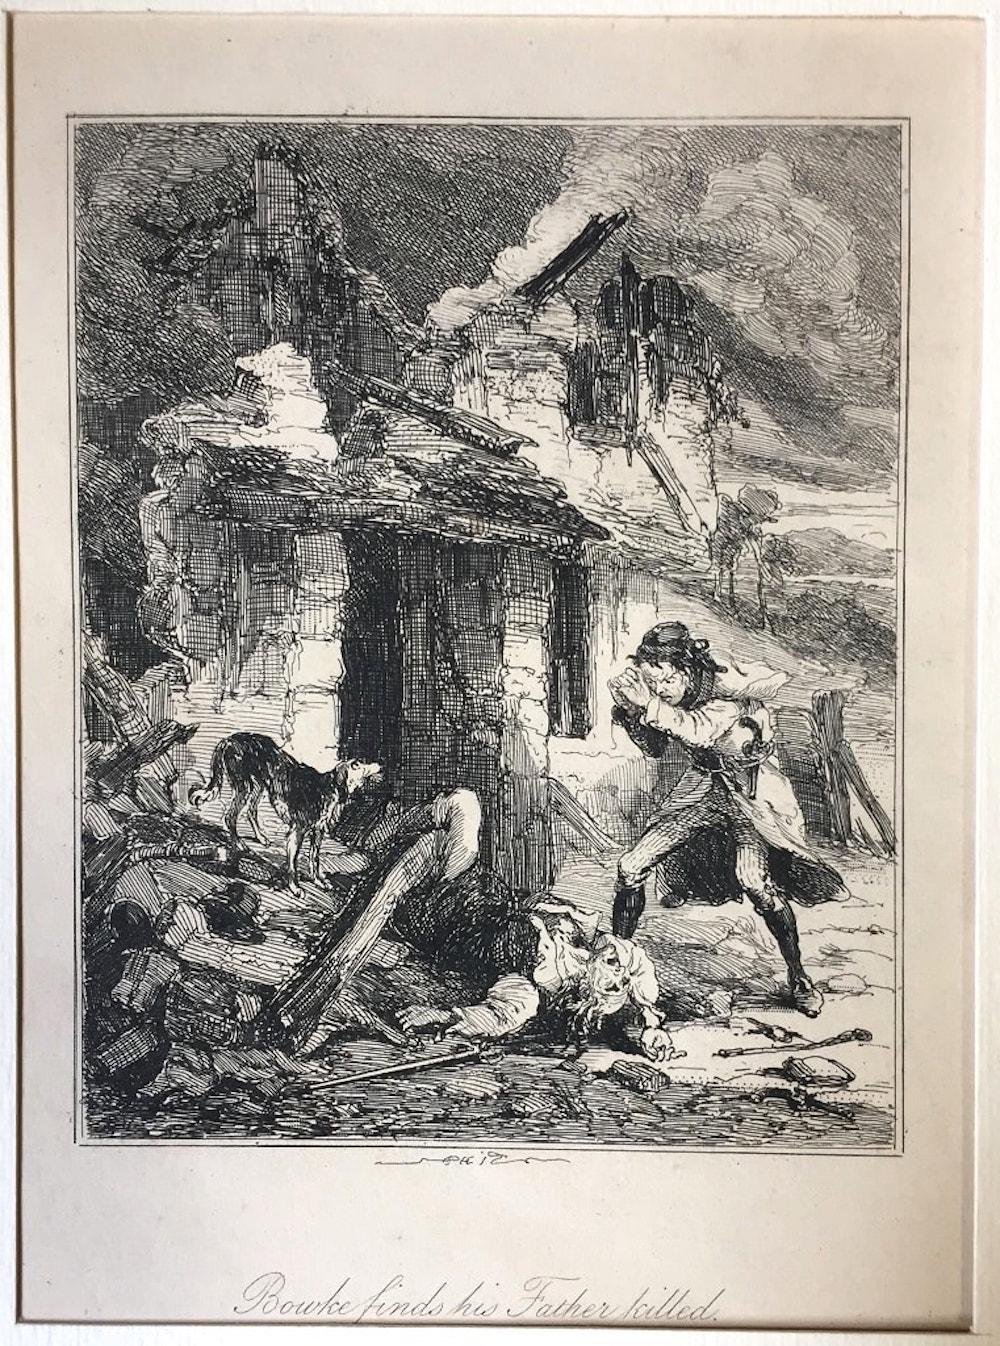 Browne Hablot Knight  Figurative Print - Bowke finds his Father killed - Original Etching by PHIZ - Mid 19th Century 